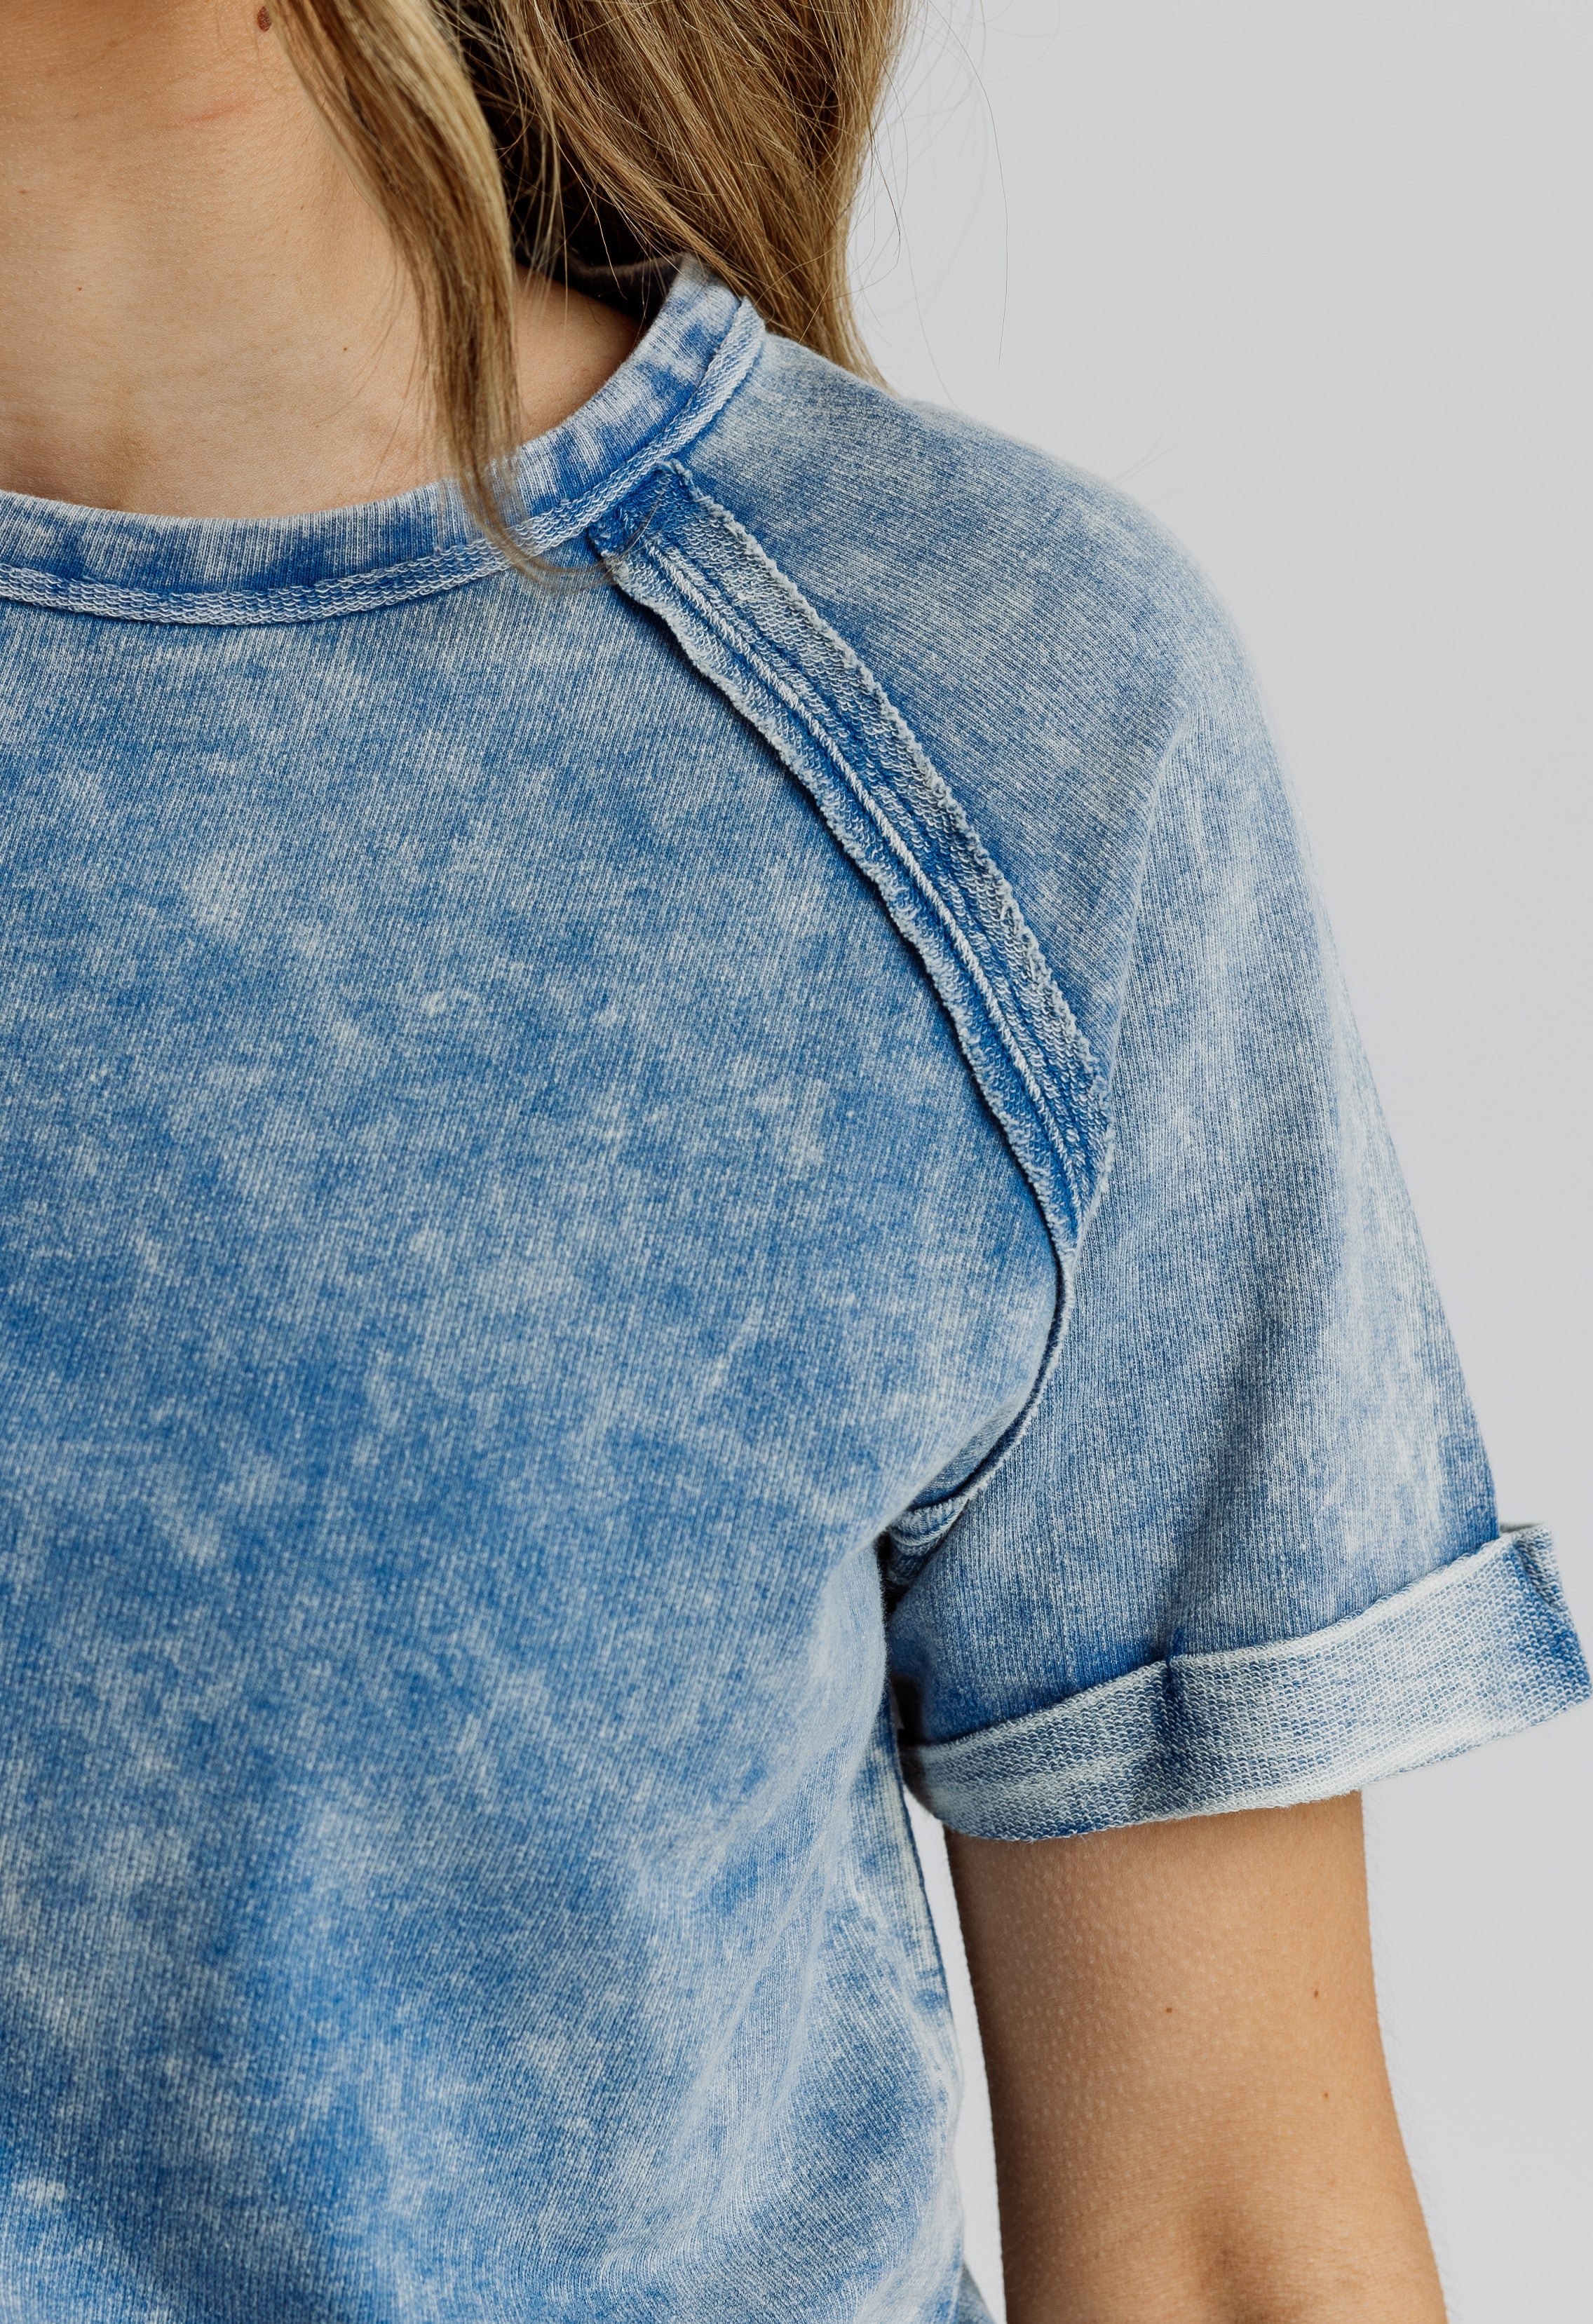 Move Like The Ocean Tee - CLASSIC BLUE - willows clothing S/S Shirt